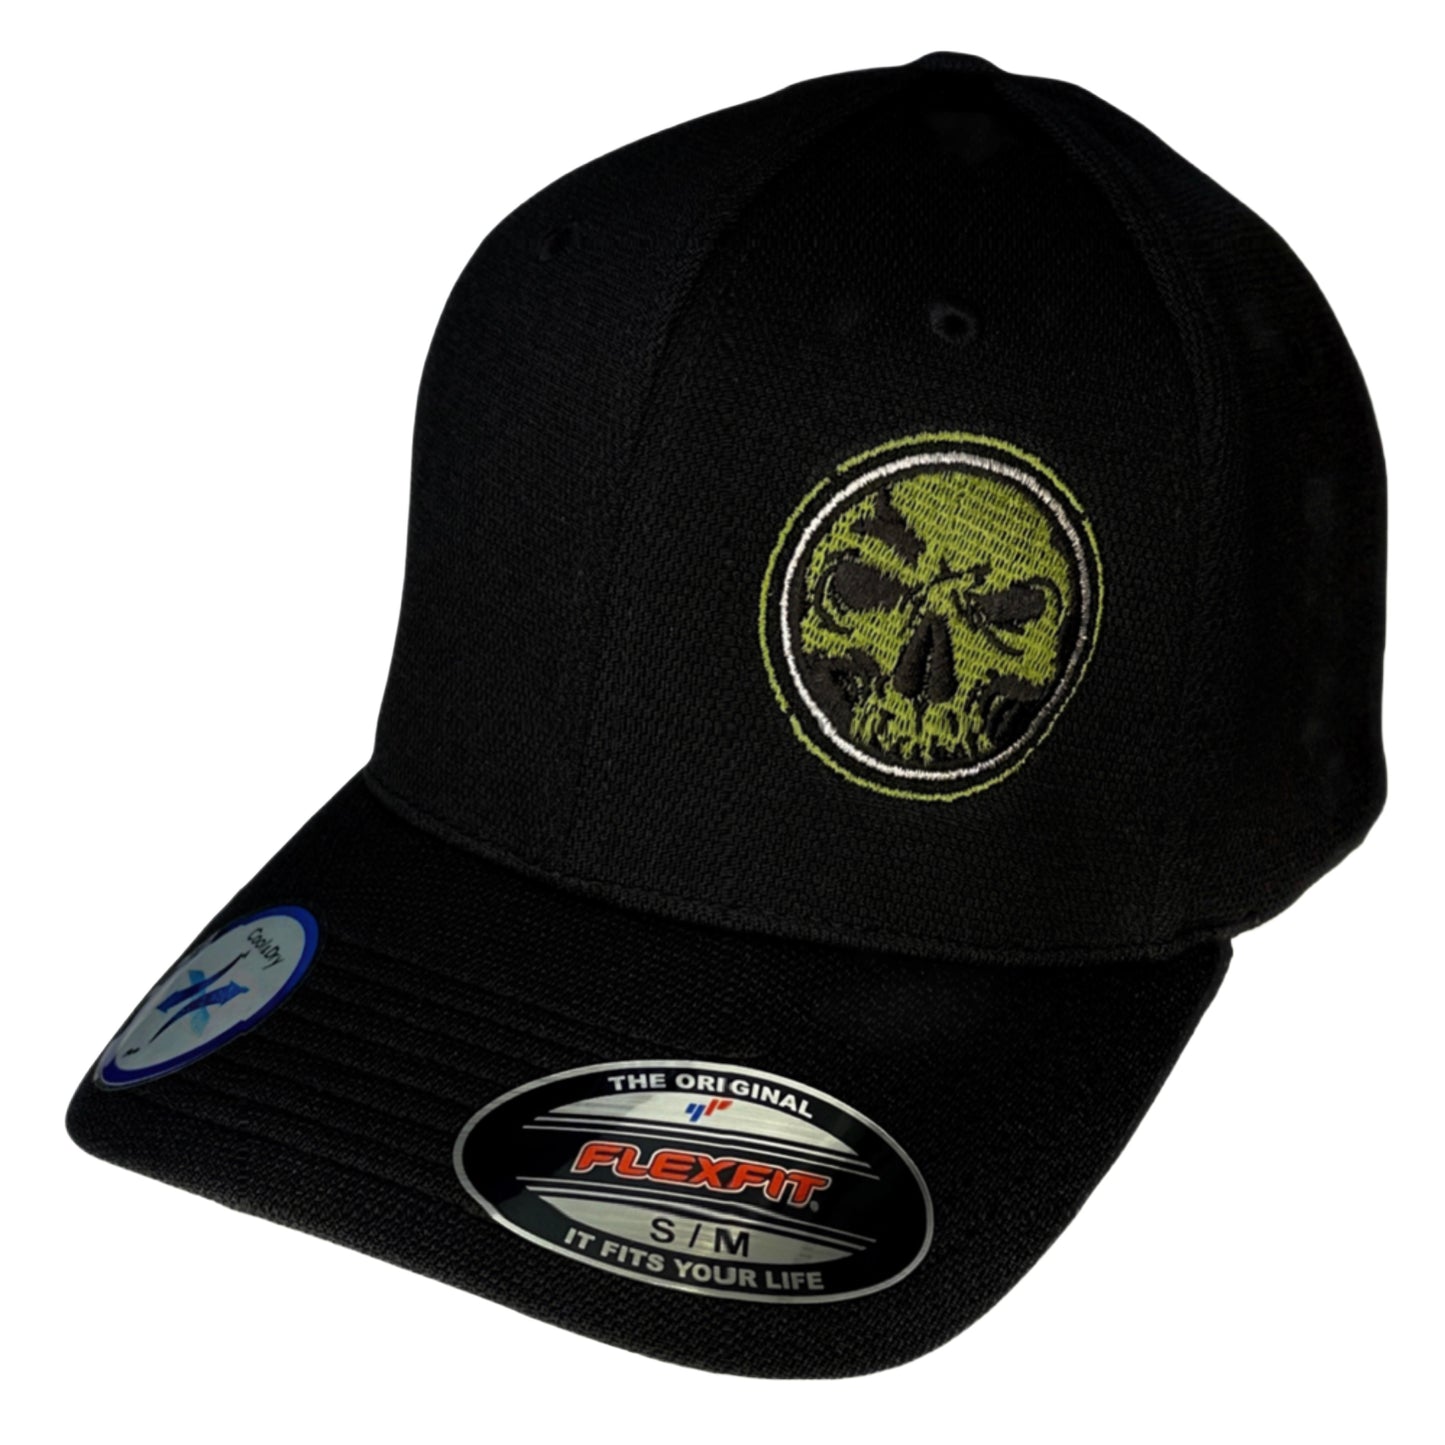 LIMITED EDITION!  Flexfit "Never Fade" Black Hat - Military Green Skull